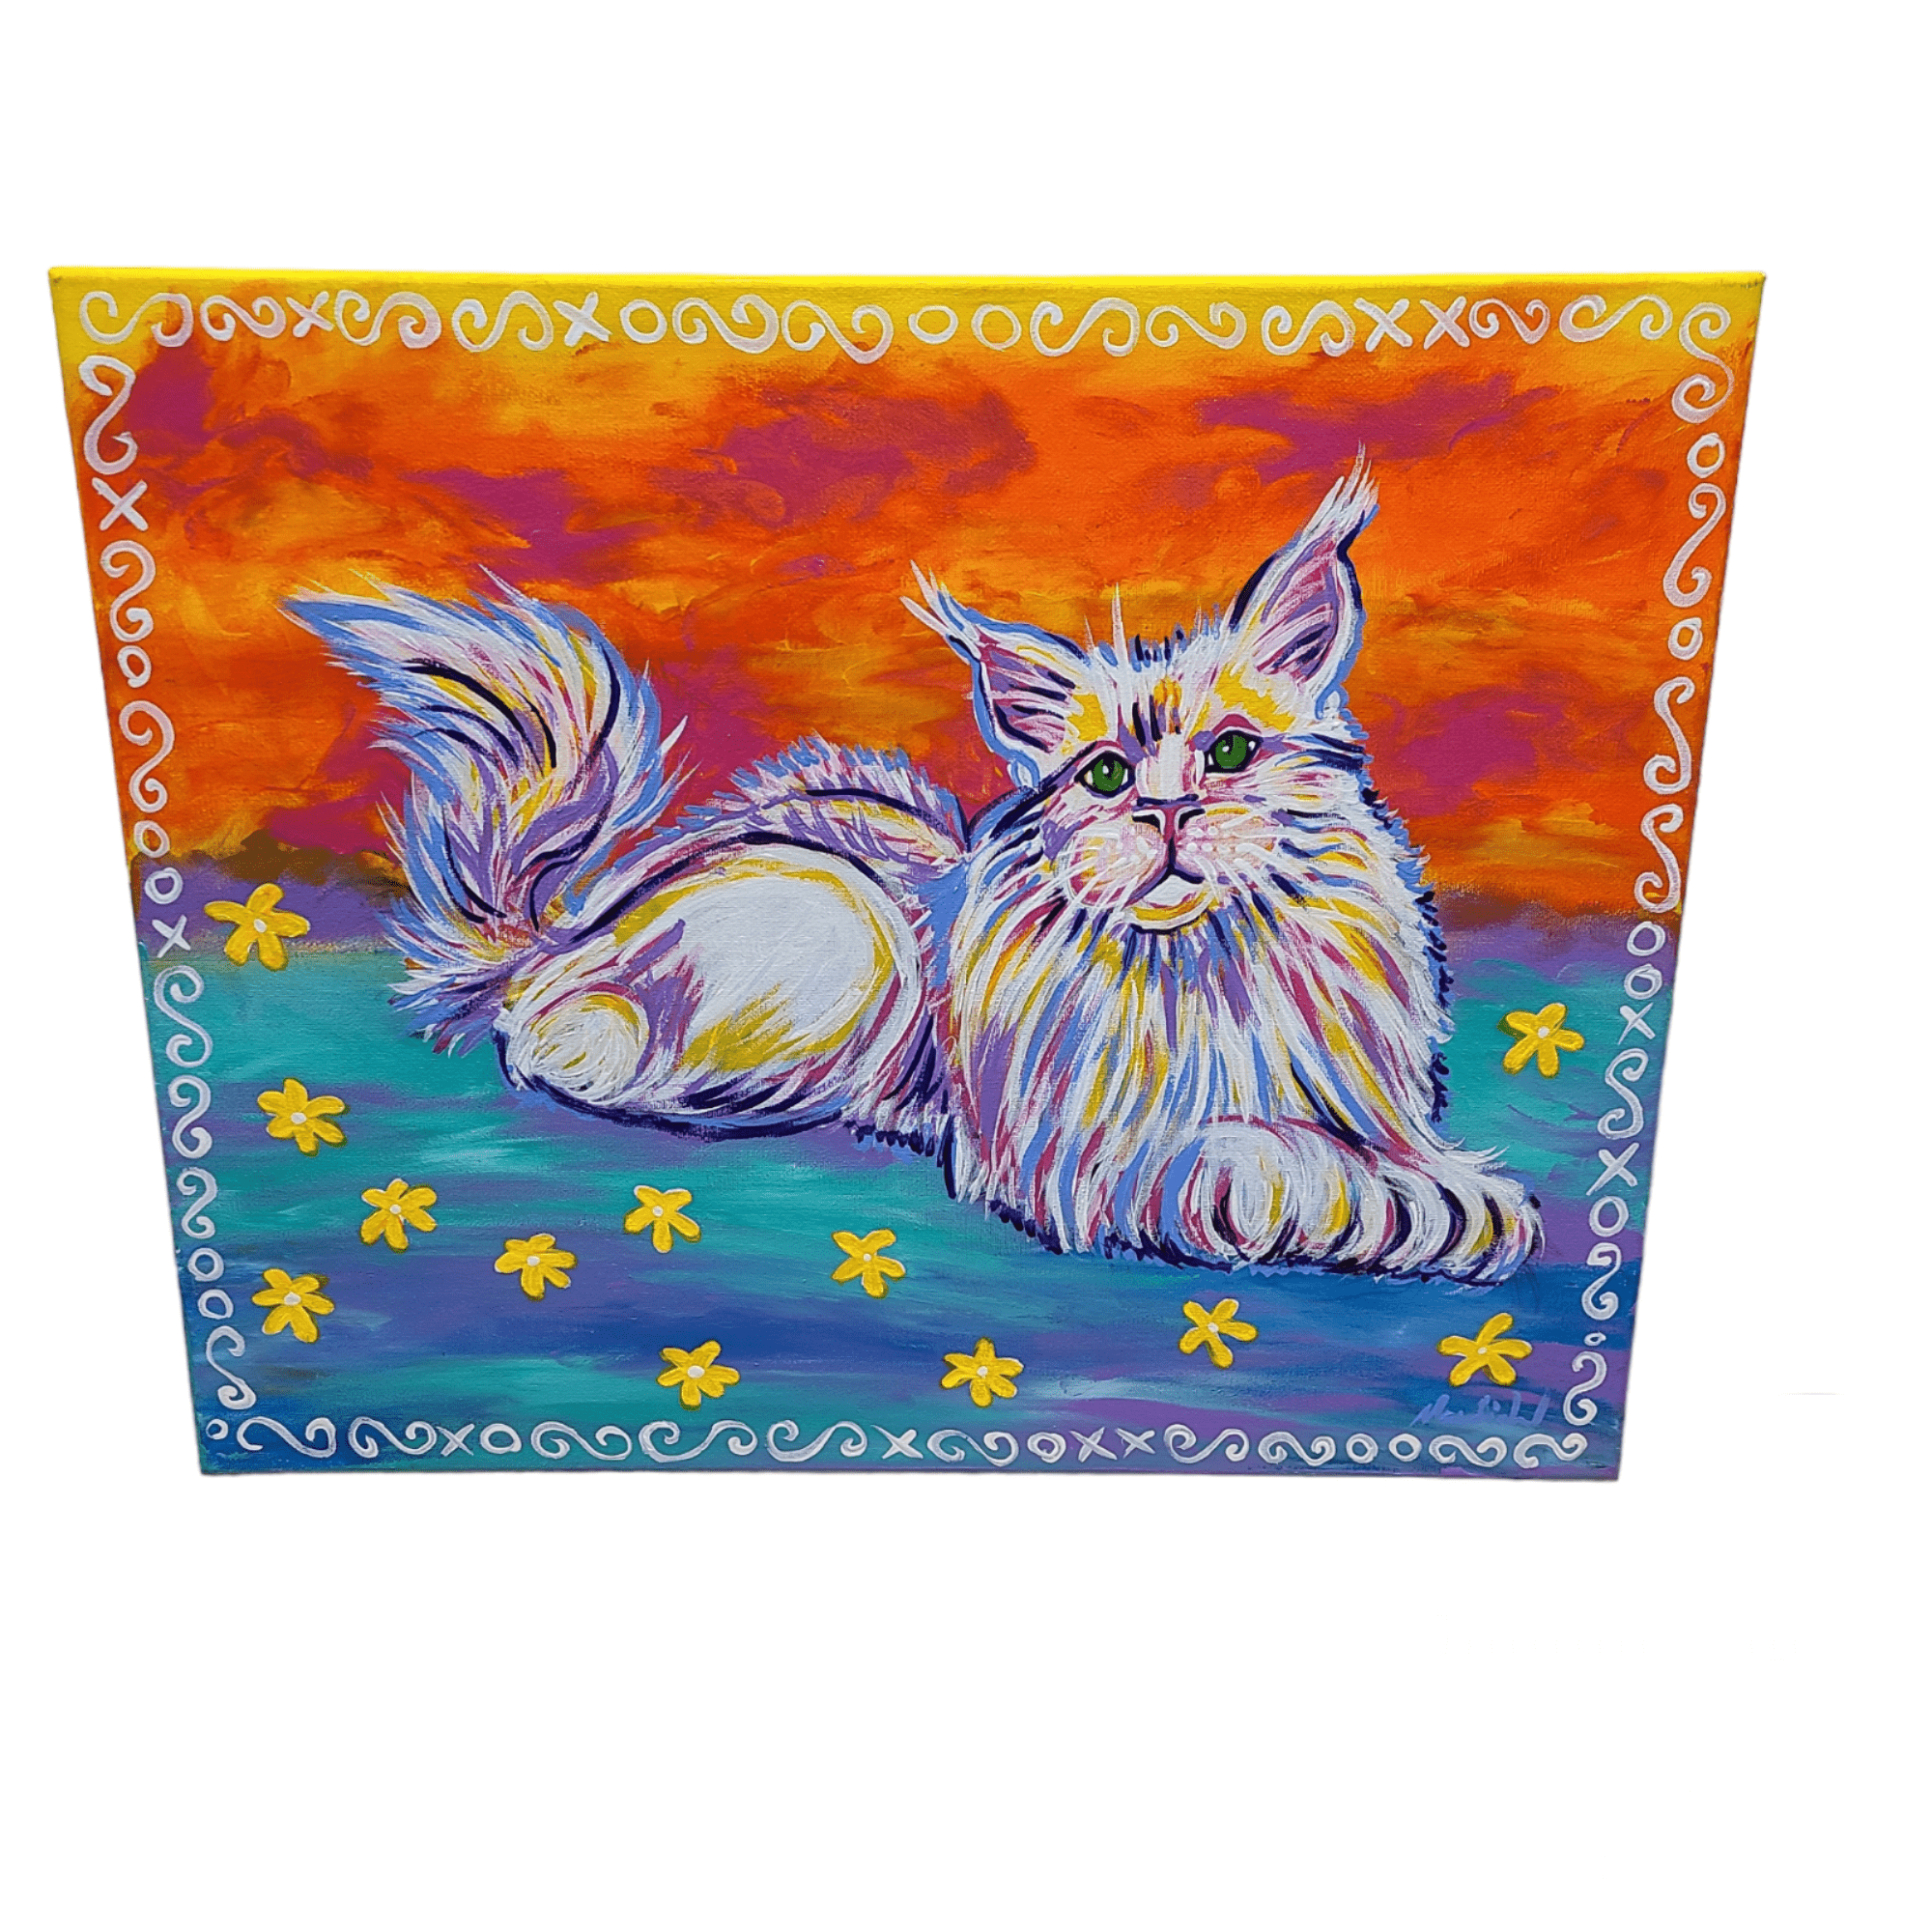 Mardiclaw Cattatonic 16" X 20" Painting On Canvas - Little Miss Muffin Children & Home